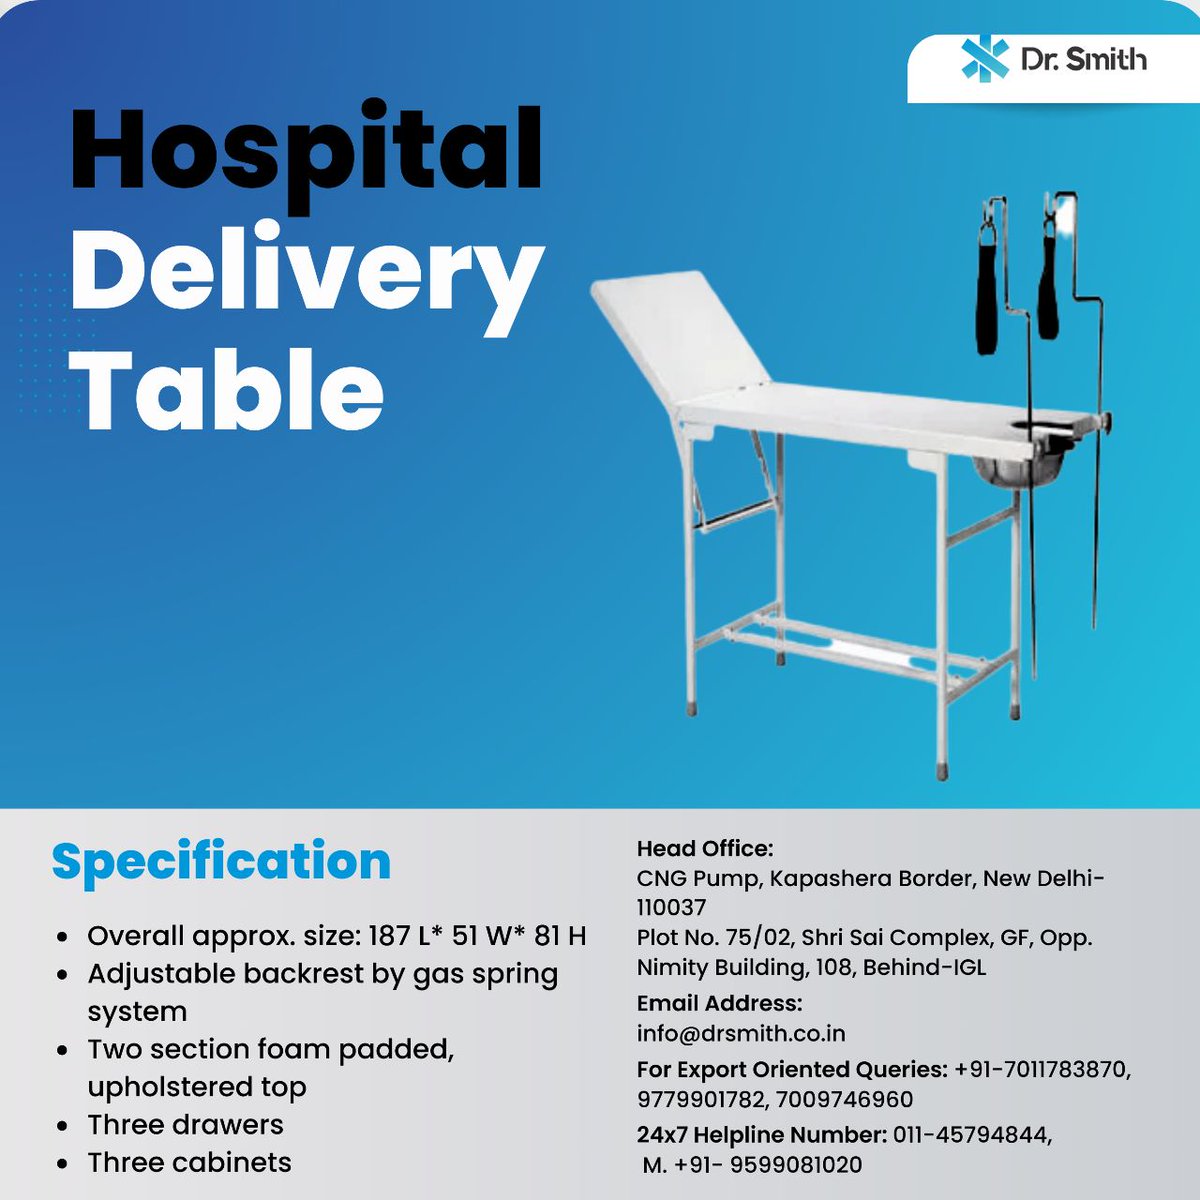 A hospital delivery table is a vital piece of equipment for any hospital or birthing center.
.
#healthcareworkers #healthcareheroes #healthcareprofessional #healthcareprofessionals #healthcareworker #healthcareforall #selfcareishealthcare #homehealthcare #naturalhealthcare